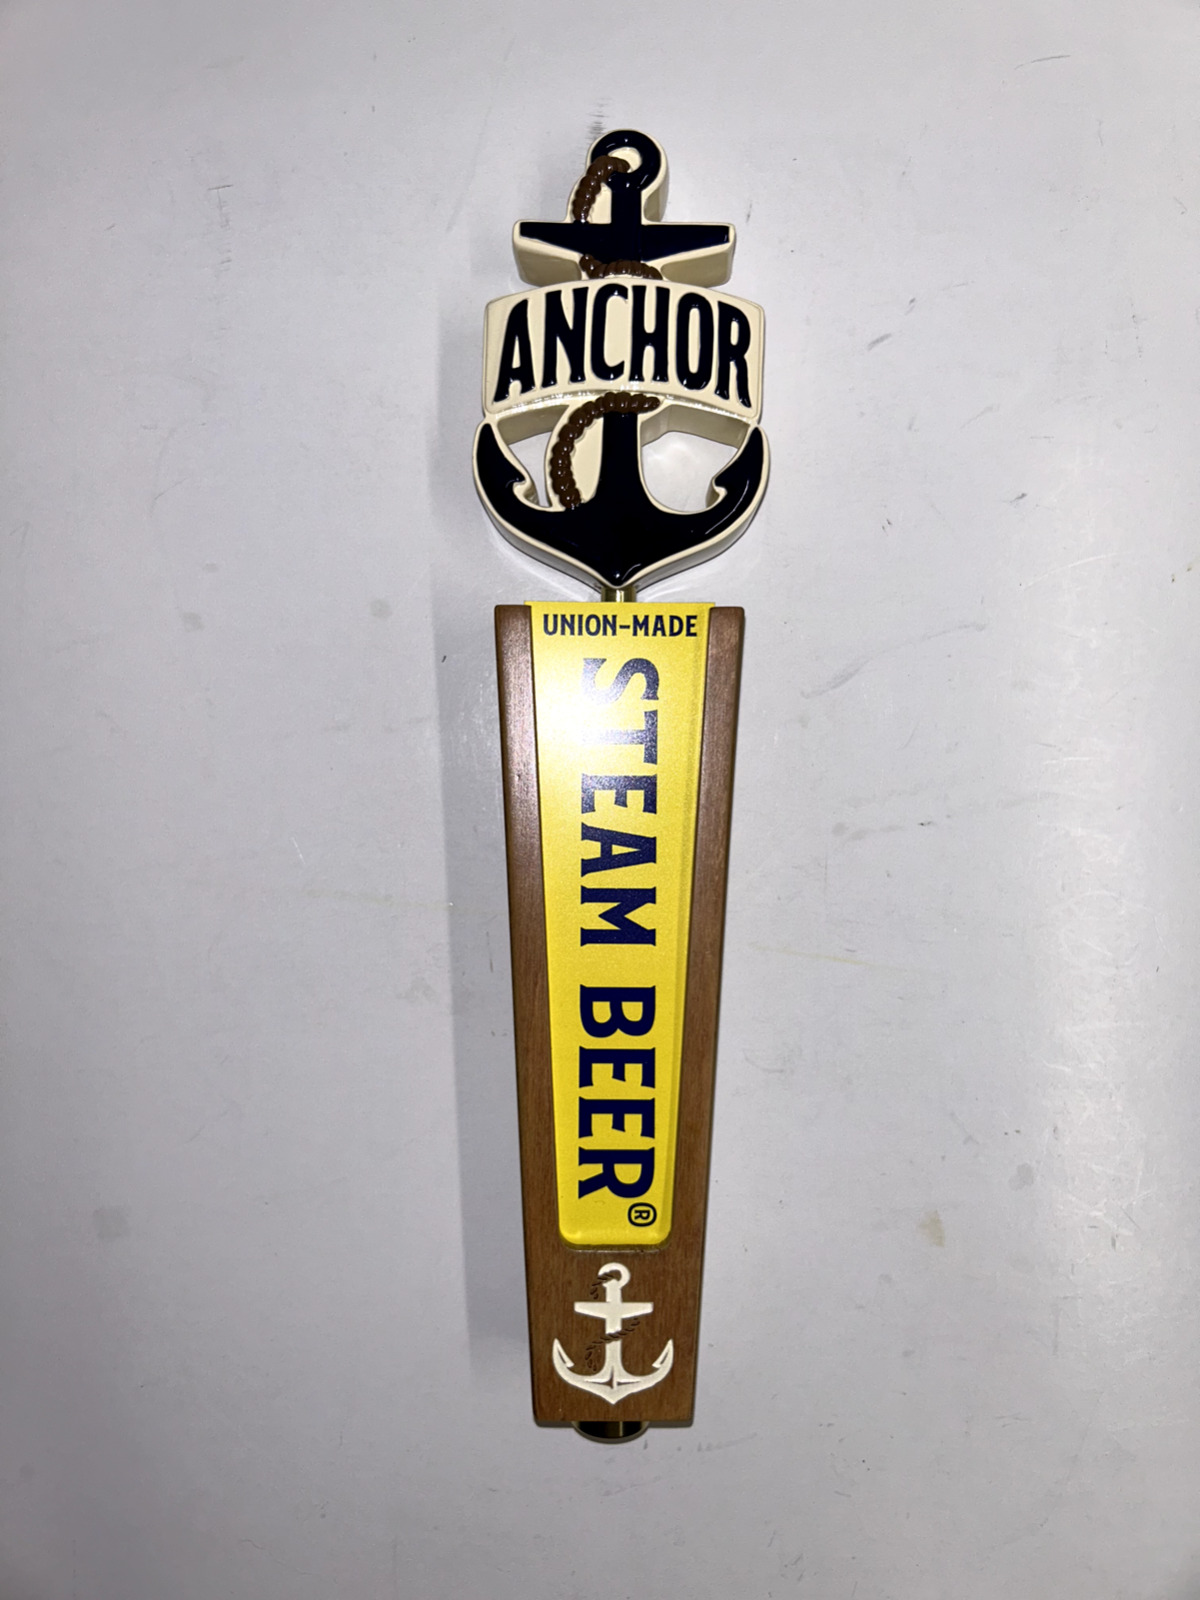 Anchor Steam Beer Tap Handle Brand New Design Never Used RARE Craft Beer Knob